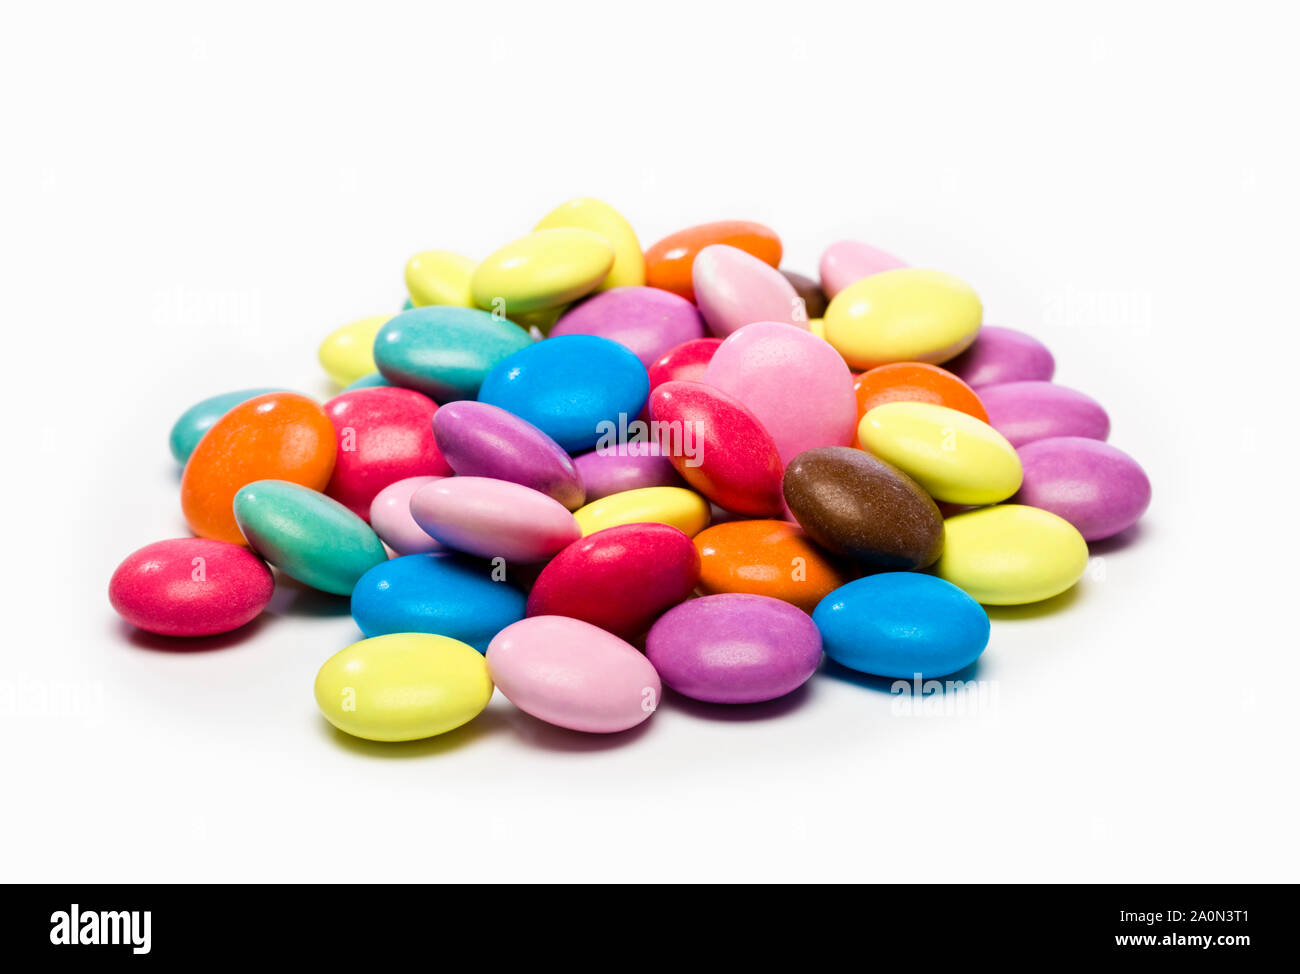 Pile of colourful candy sweets Stock Photo